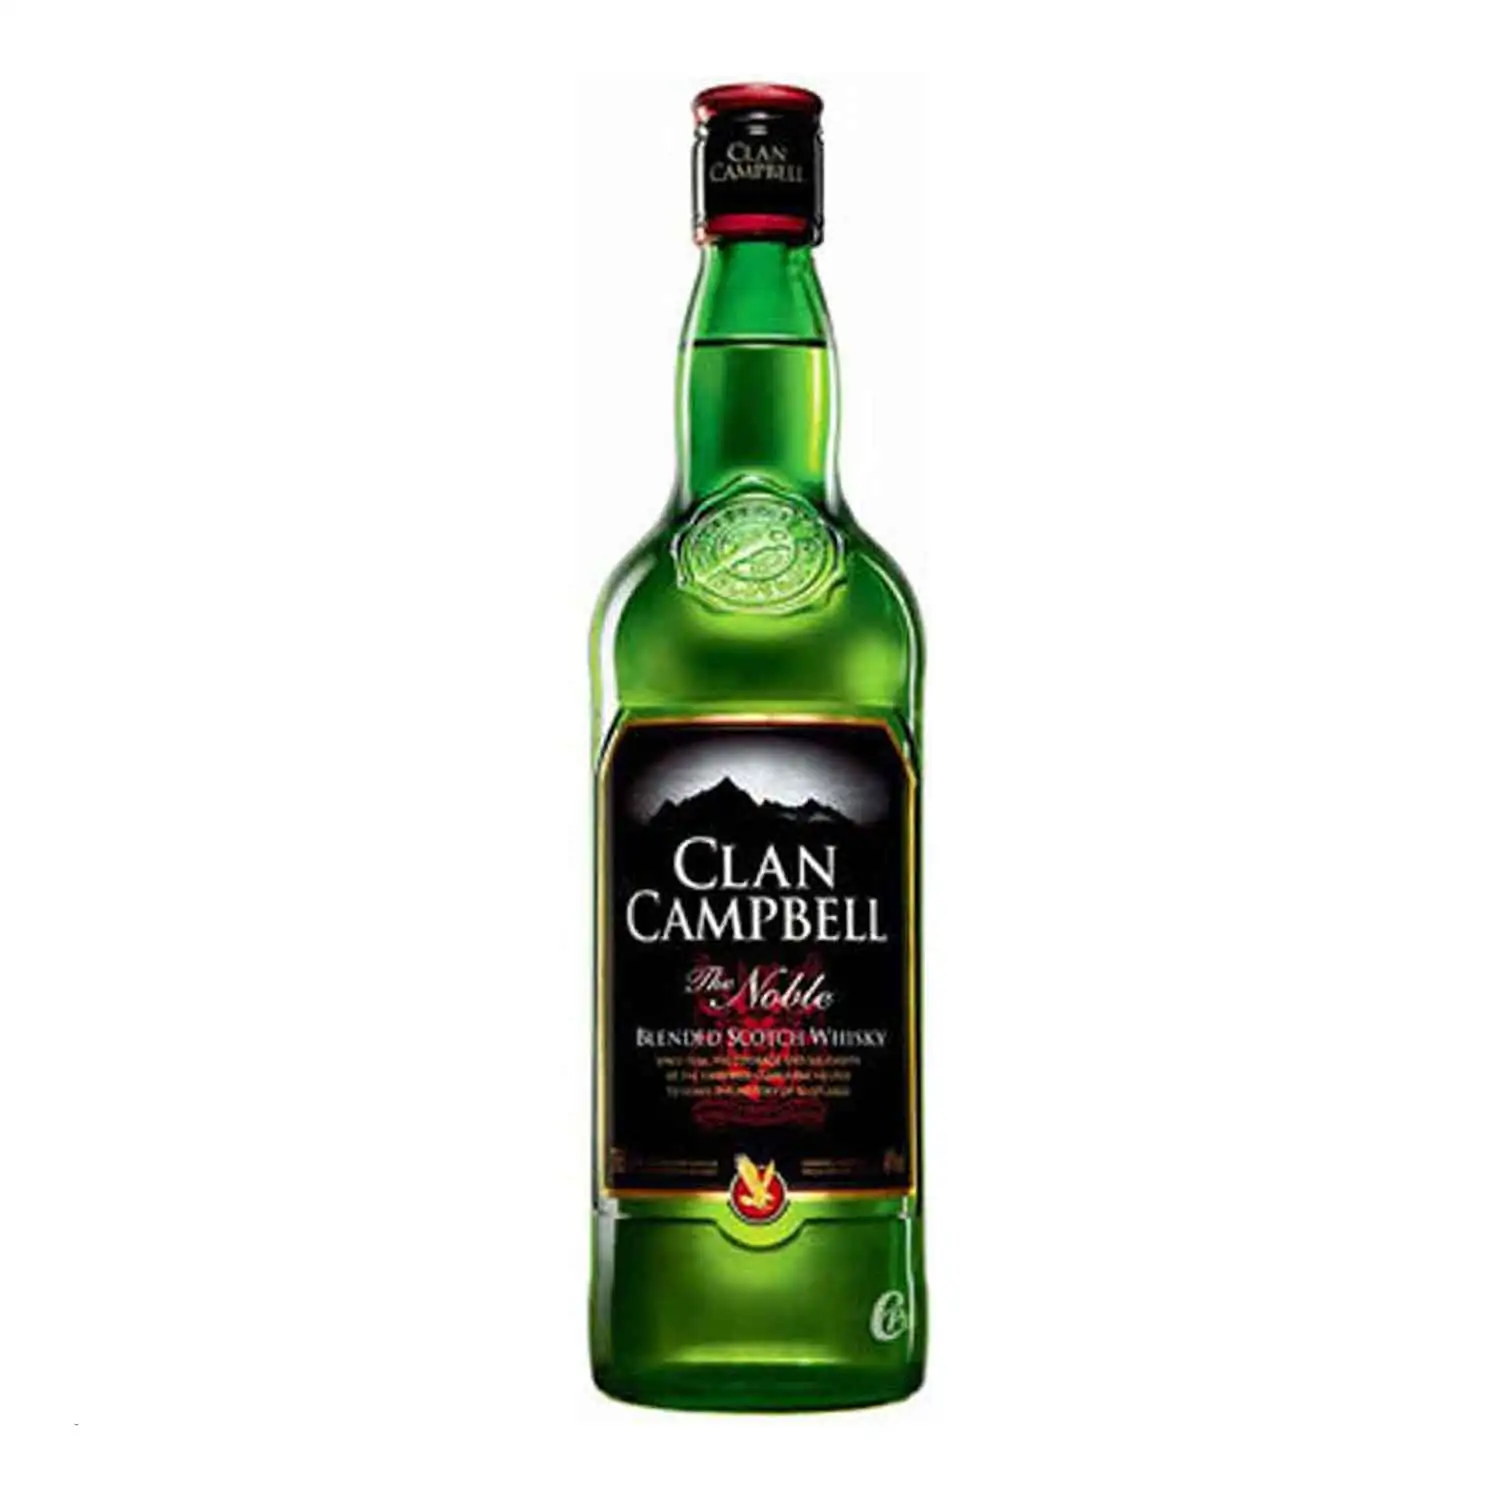 Clan Campbell 1l Alc 40% - Buy at Real Tobacco